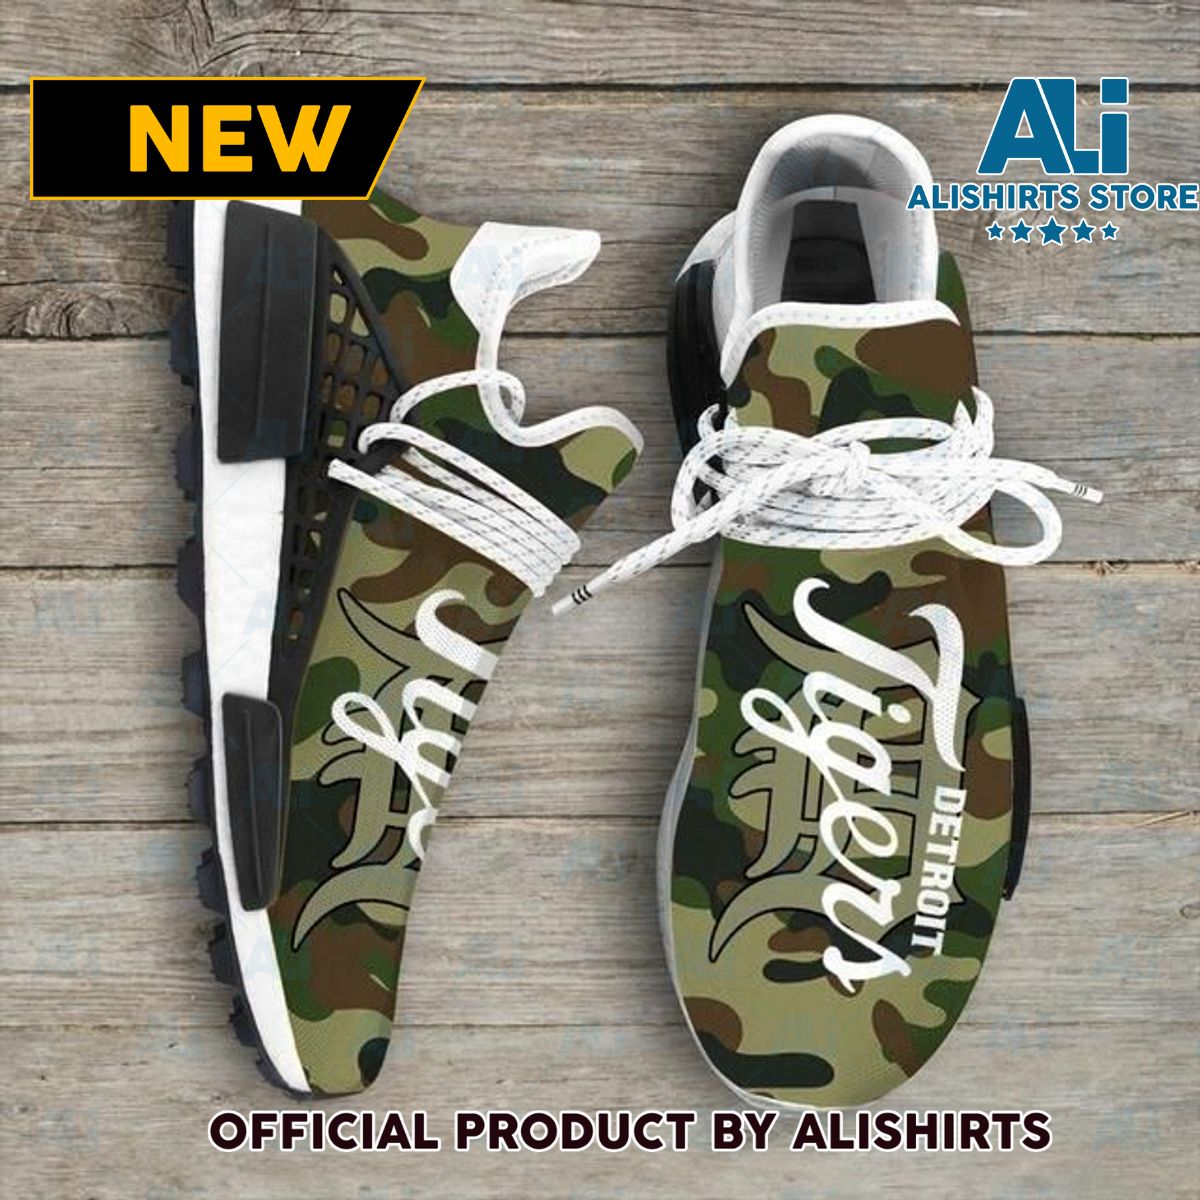 Camo Camouflage Detroit Tigers MLB NMD Human Race shoes Customized Adidas NMD Sneakers